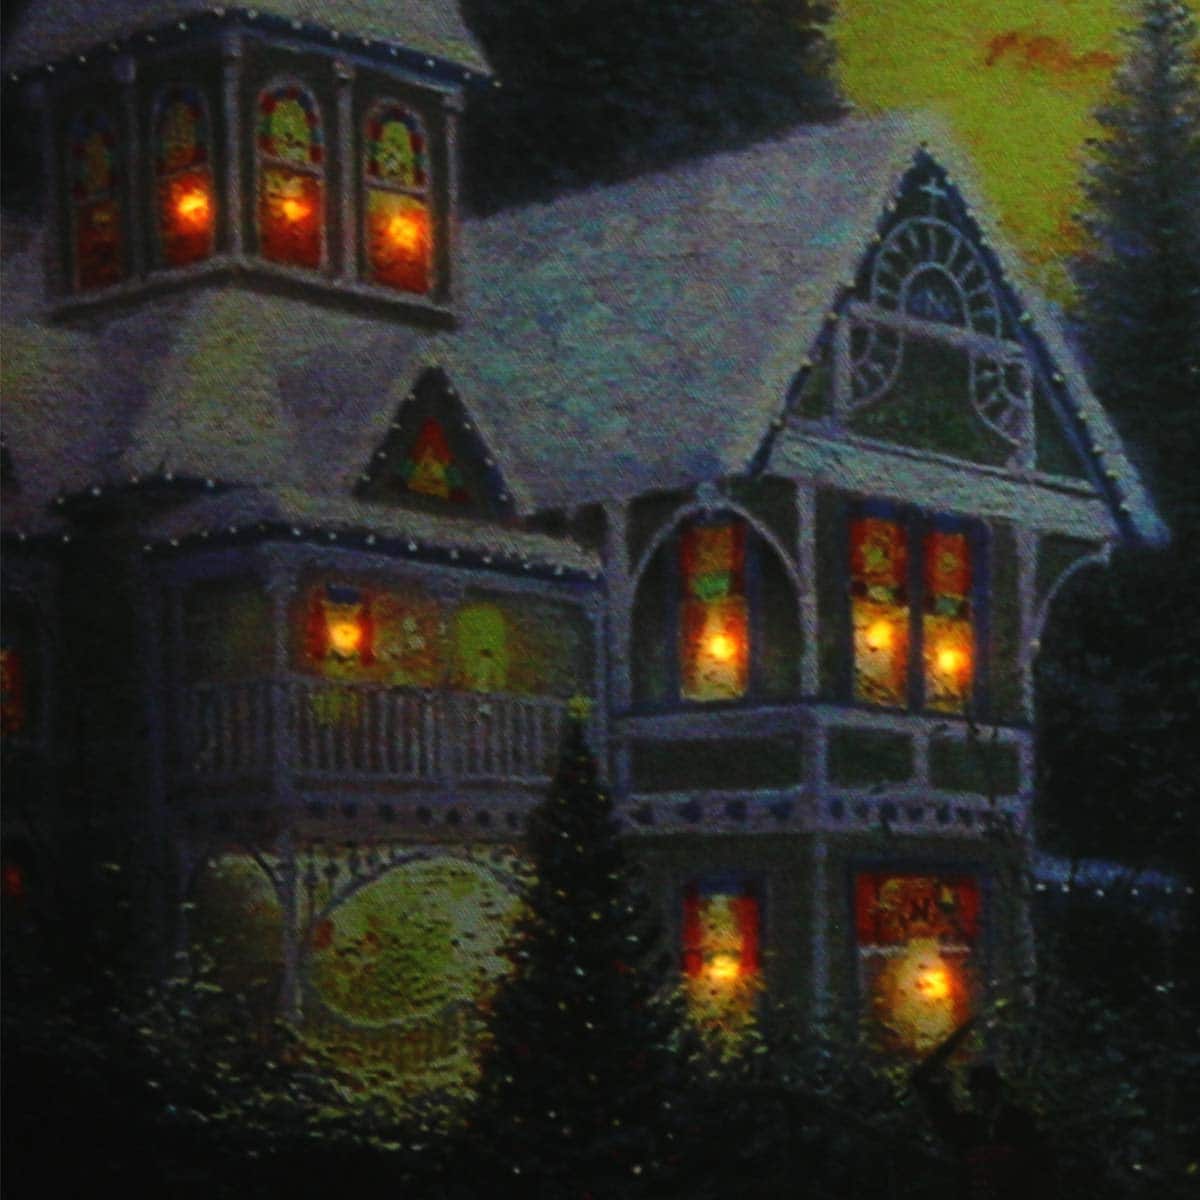 LED Lighted Victorian Christmas at Sunset Canvas Wall Art 15.75